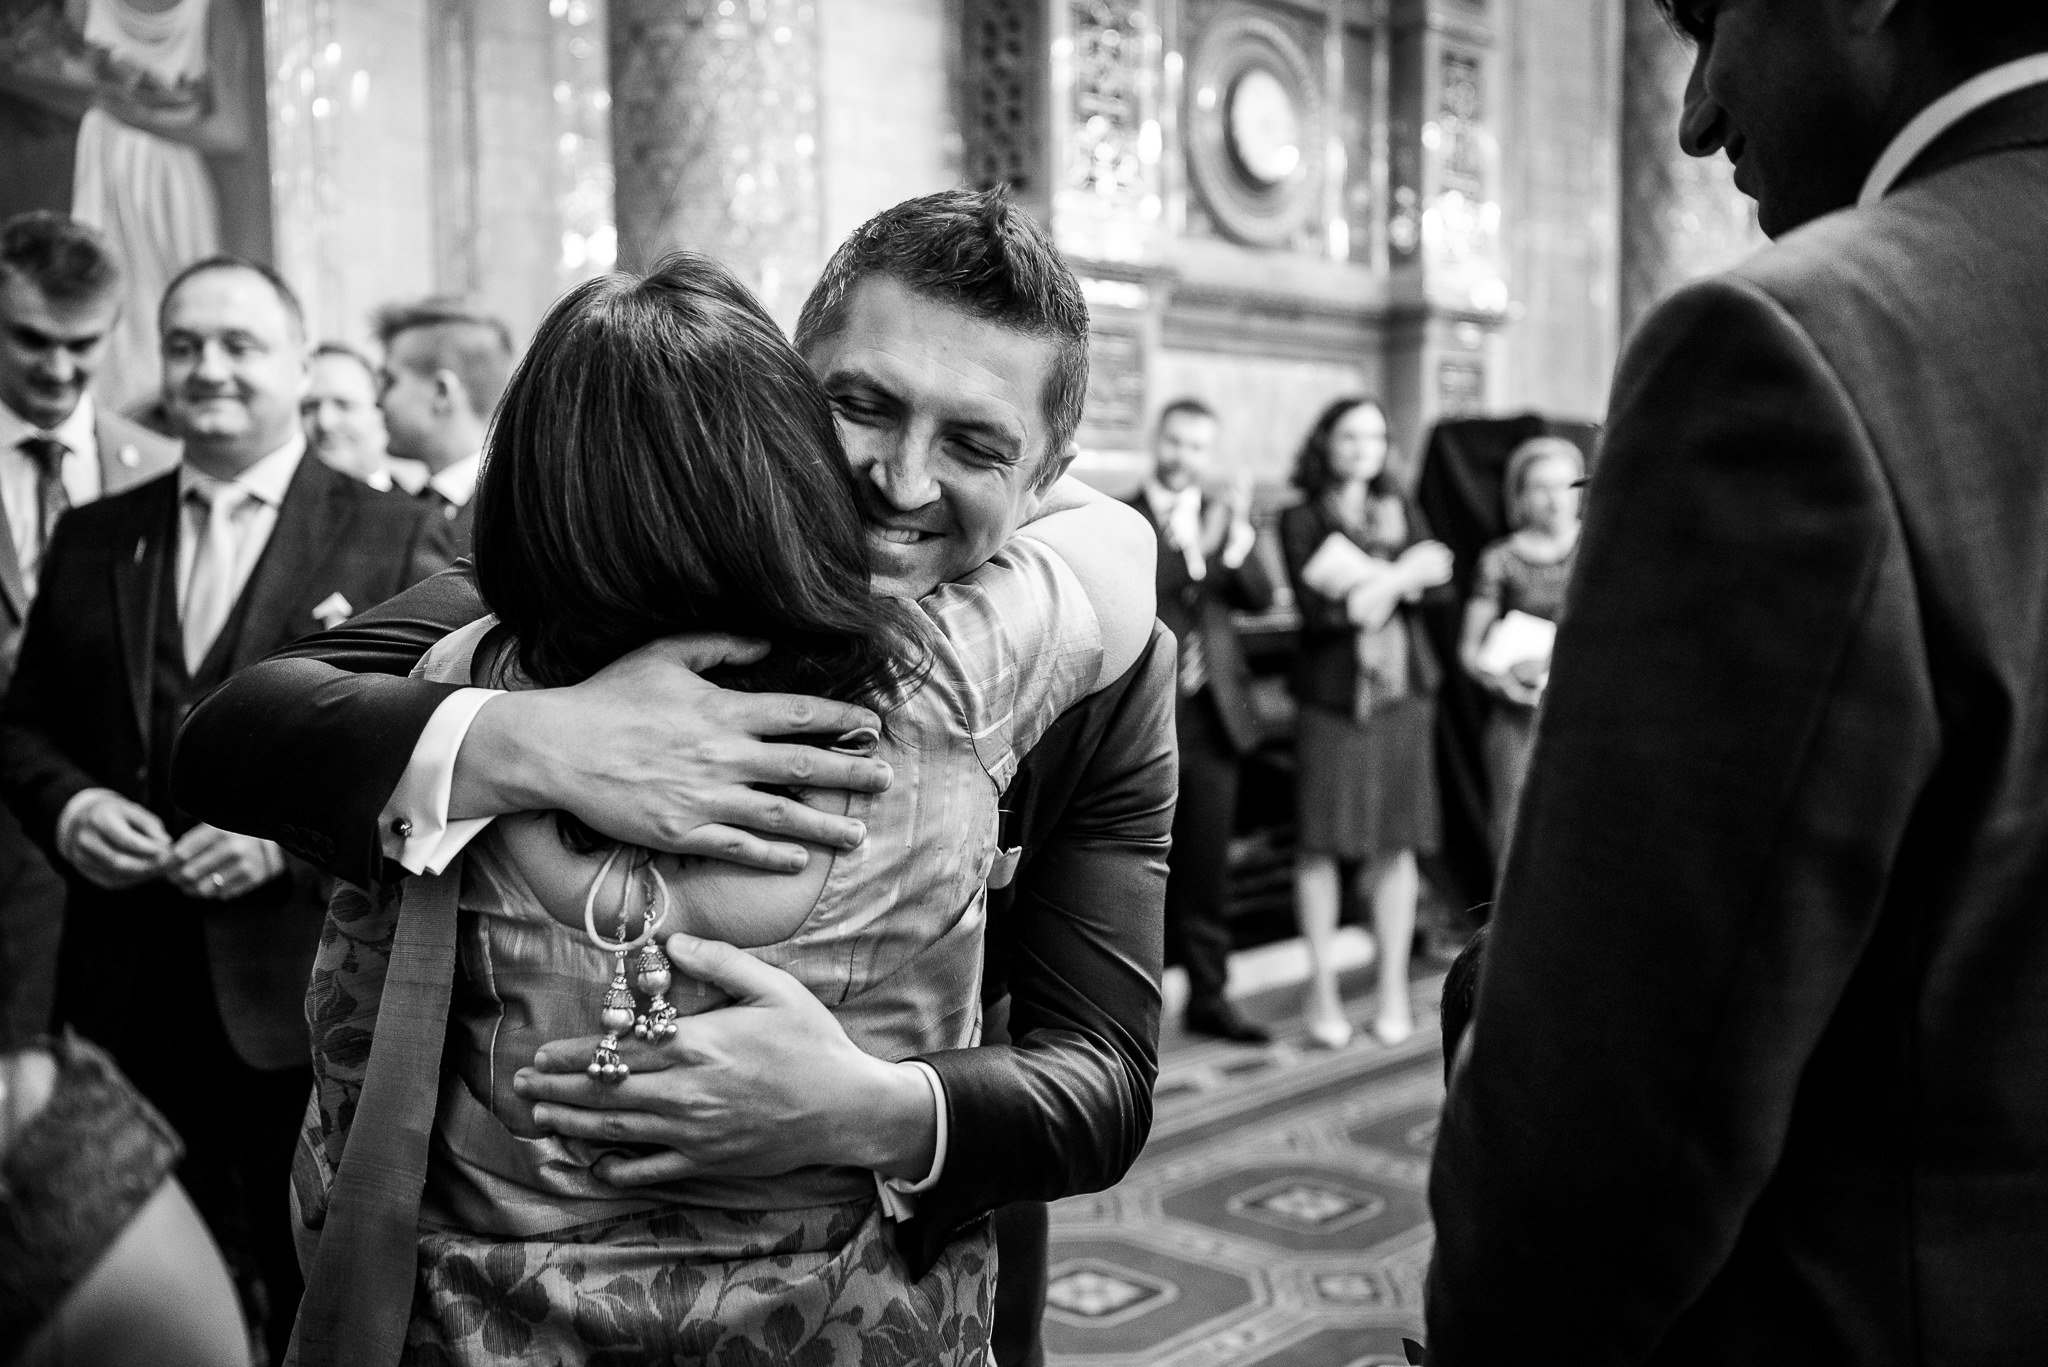  Groom hugging a wedding guest at One Whitehall Place London 